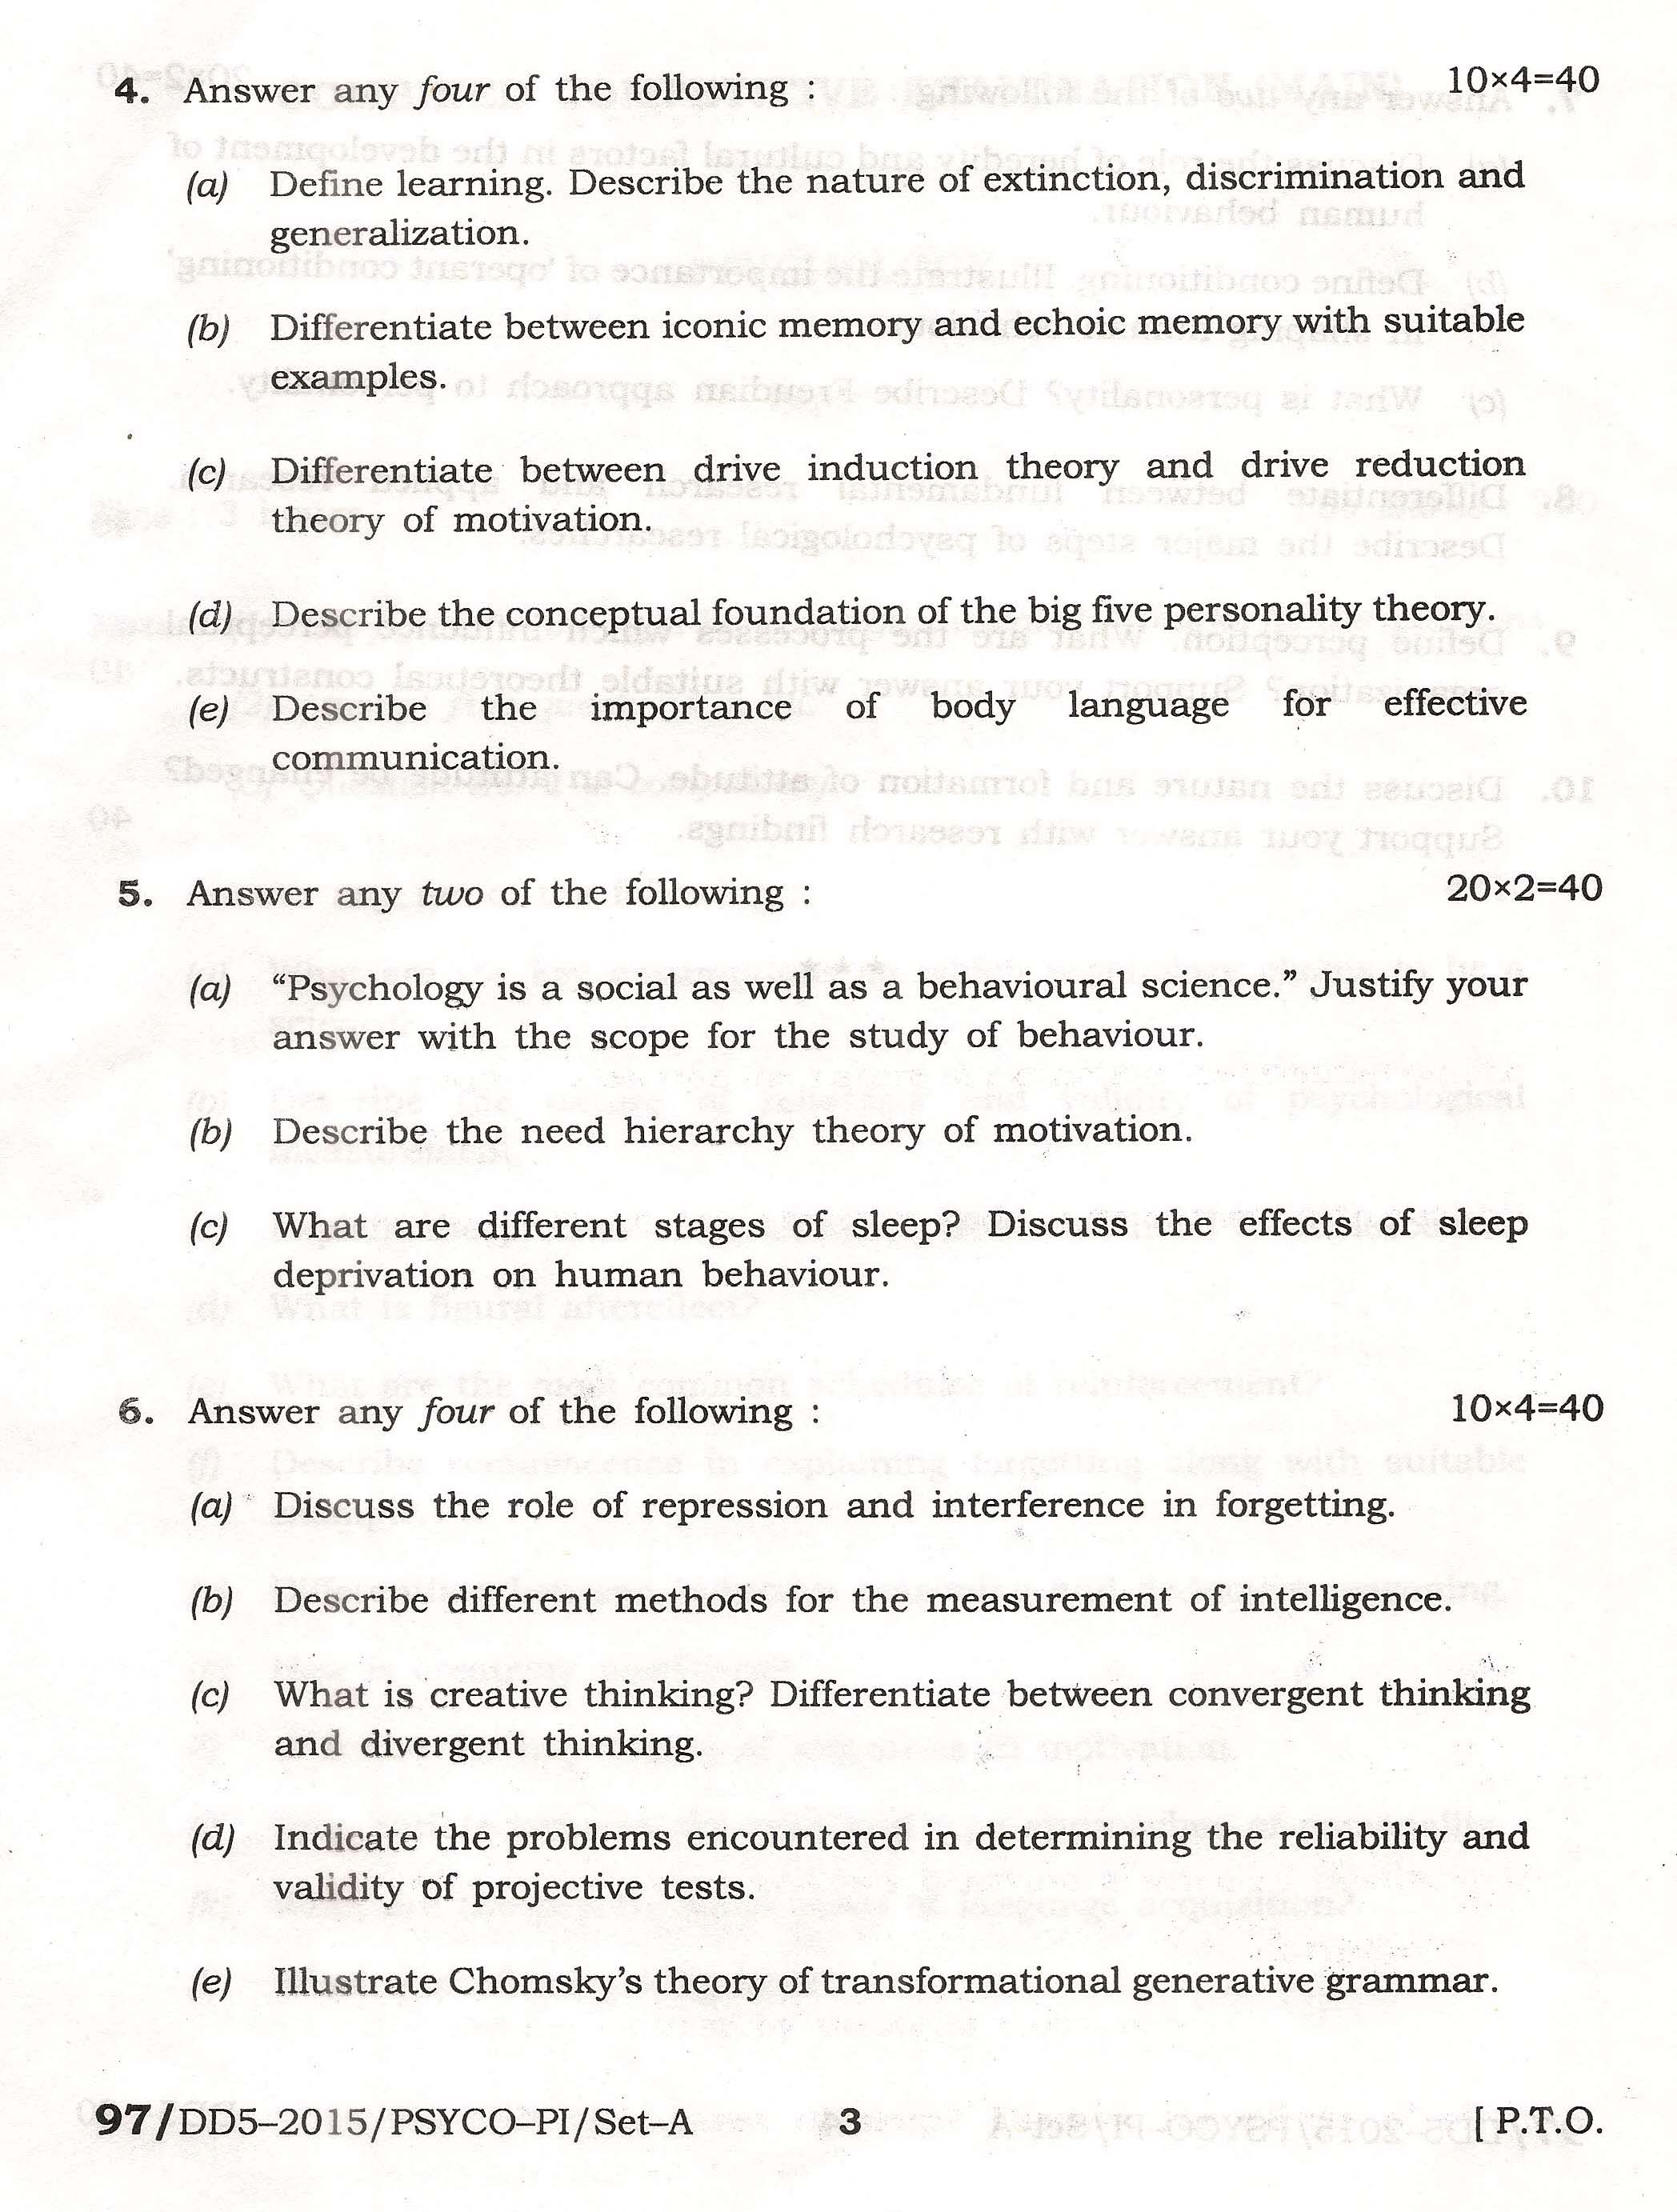 APPSC Combined Competitive Main Exam 2015 Psychology Paper I 3